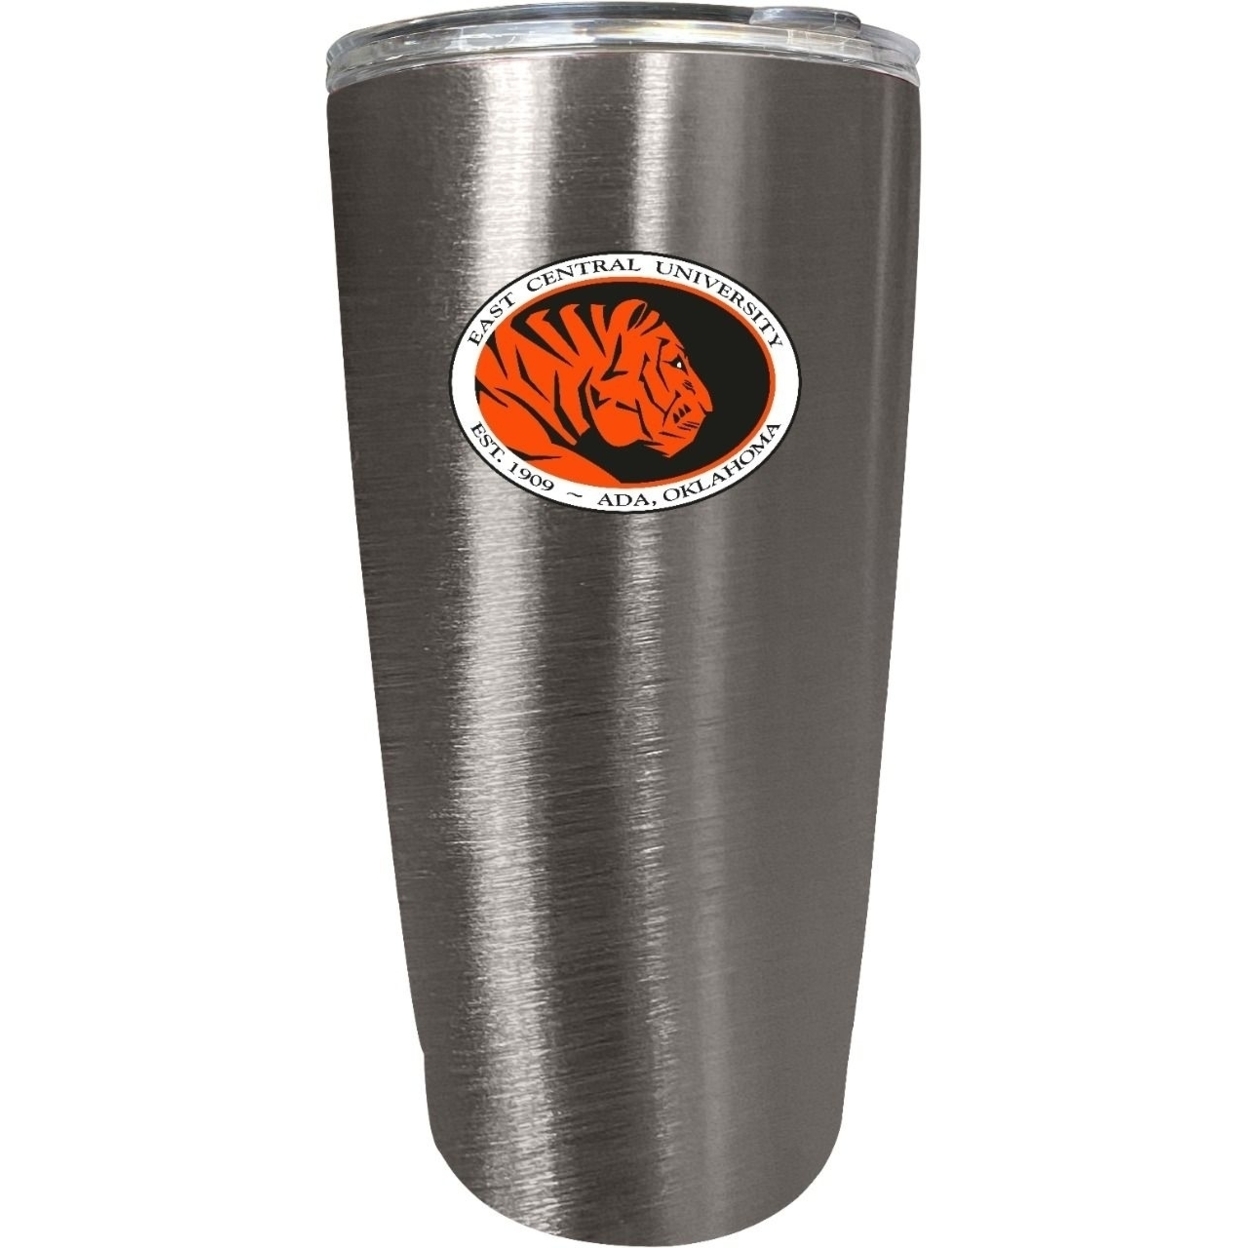 East Central University Tigers 16 Oz Insulated Stainless Steel Tumbler Colorless